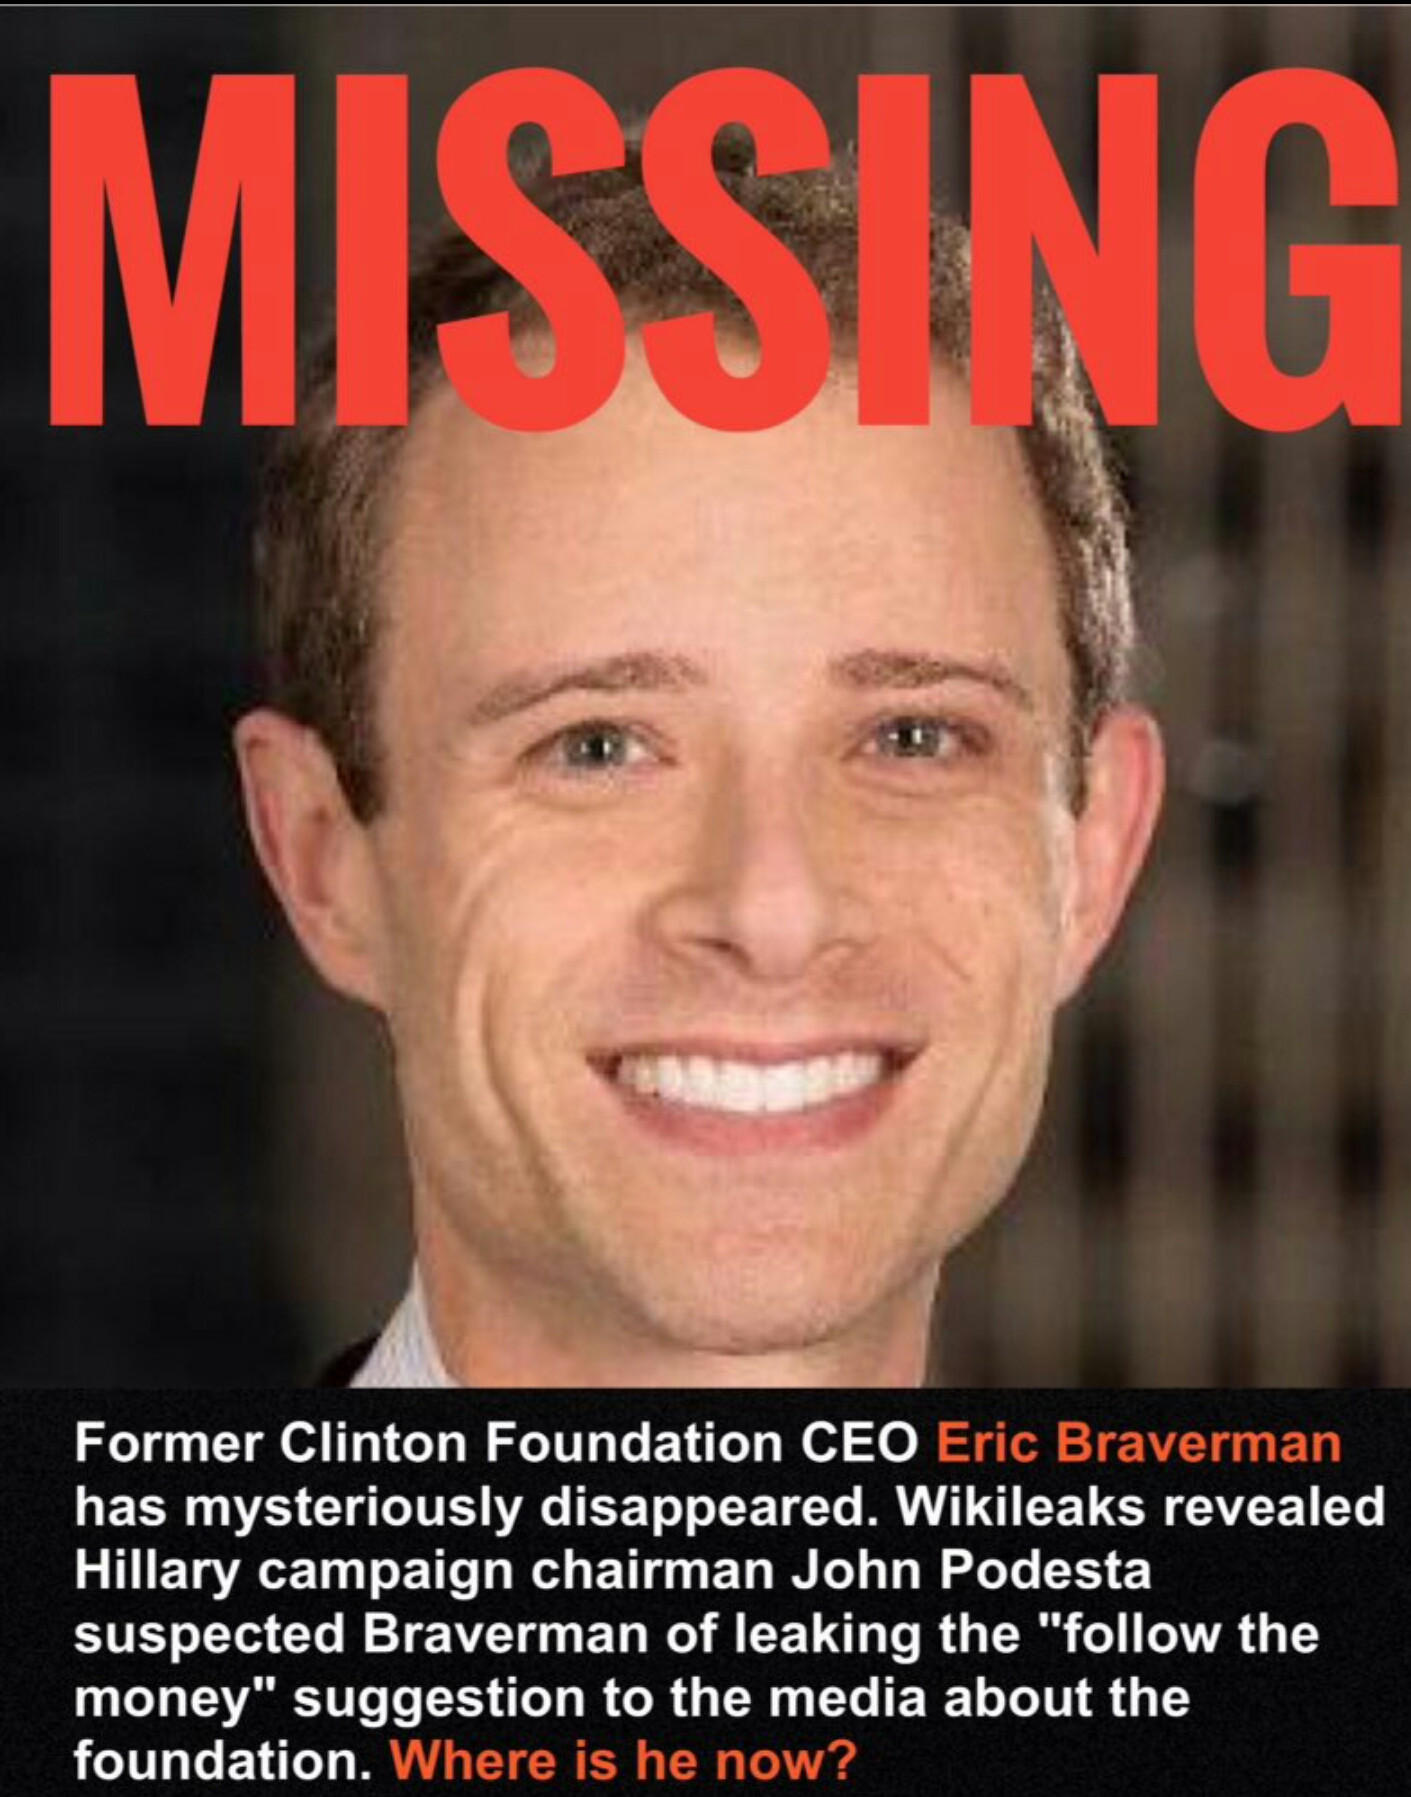 NEW MISSING PERSON: Former Clinton Foundation CEO Eric Braverman has gone missing after John Podesta suspected Braverman of leaking the "Follow The Money" suggestion to the media and the world. VERY suspicious.